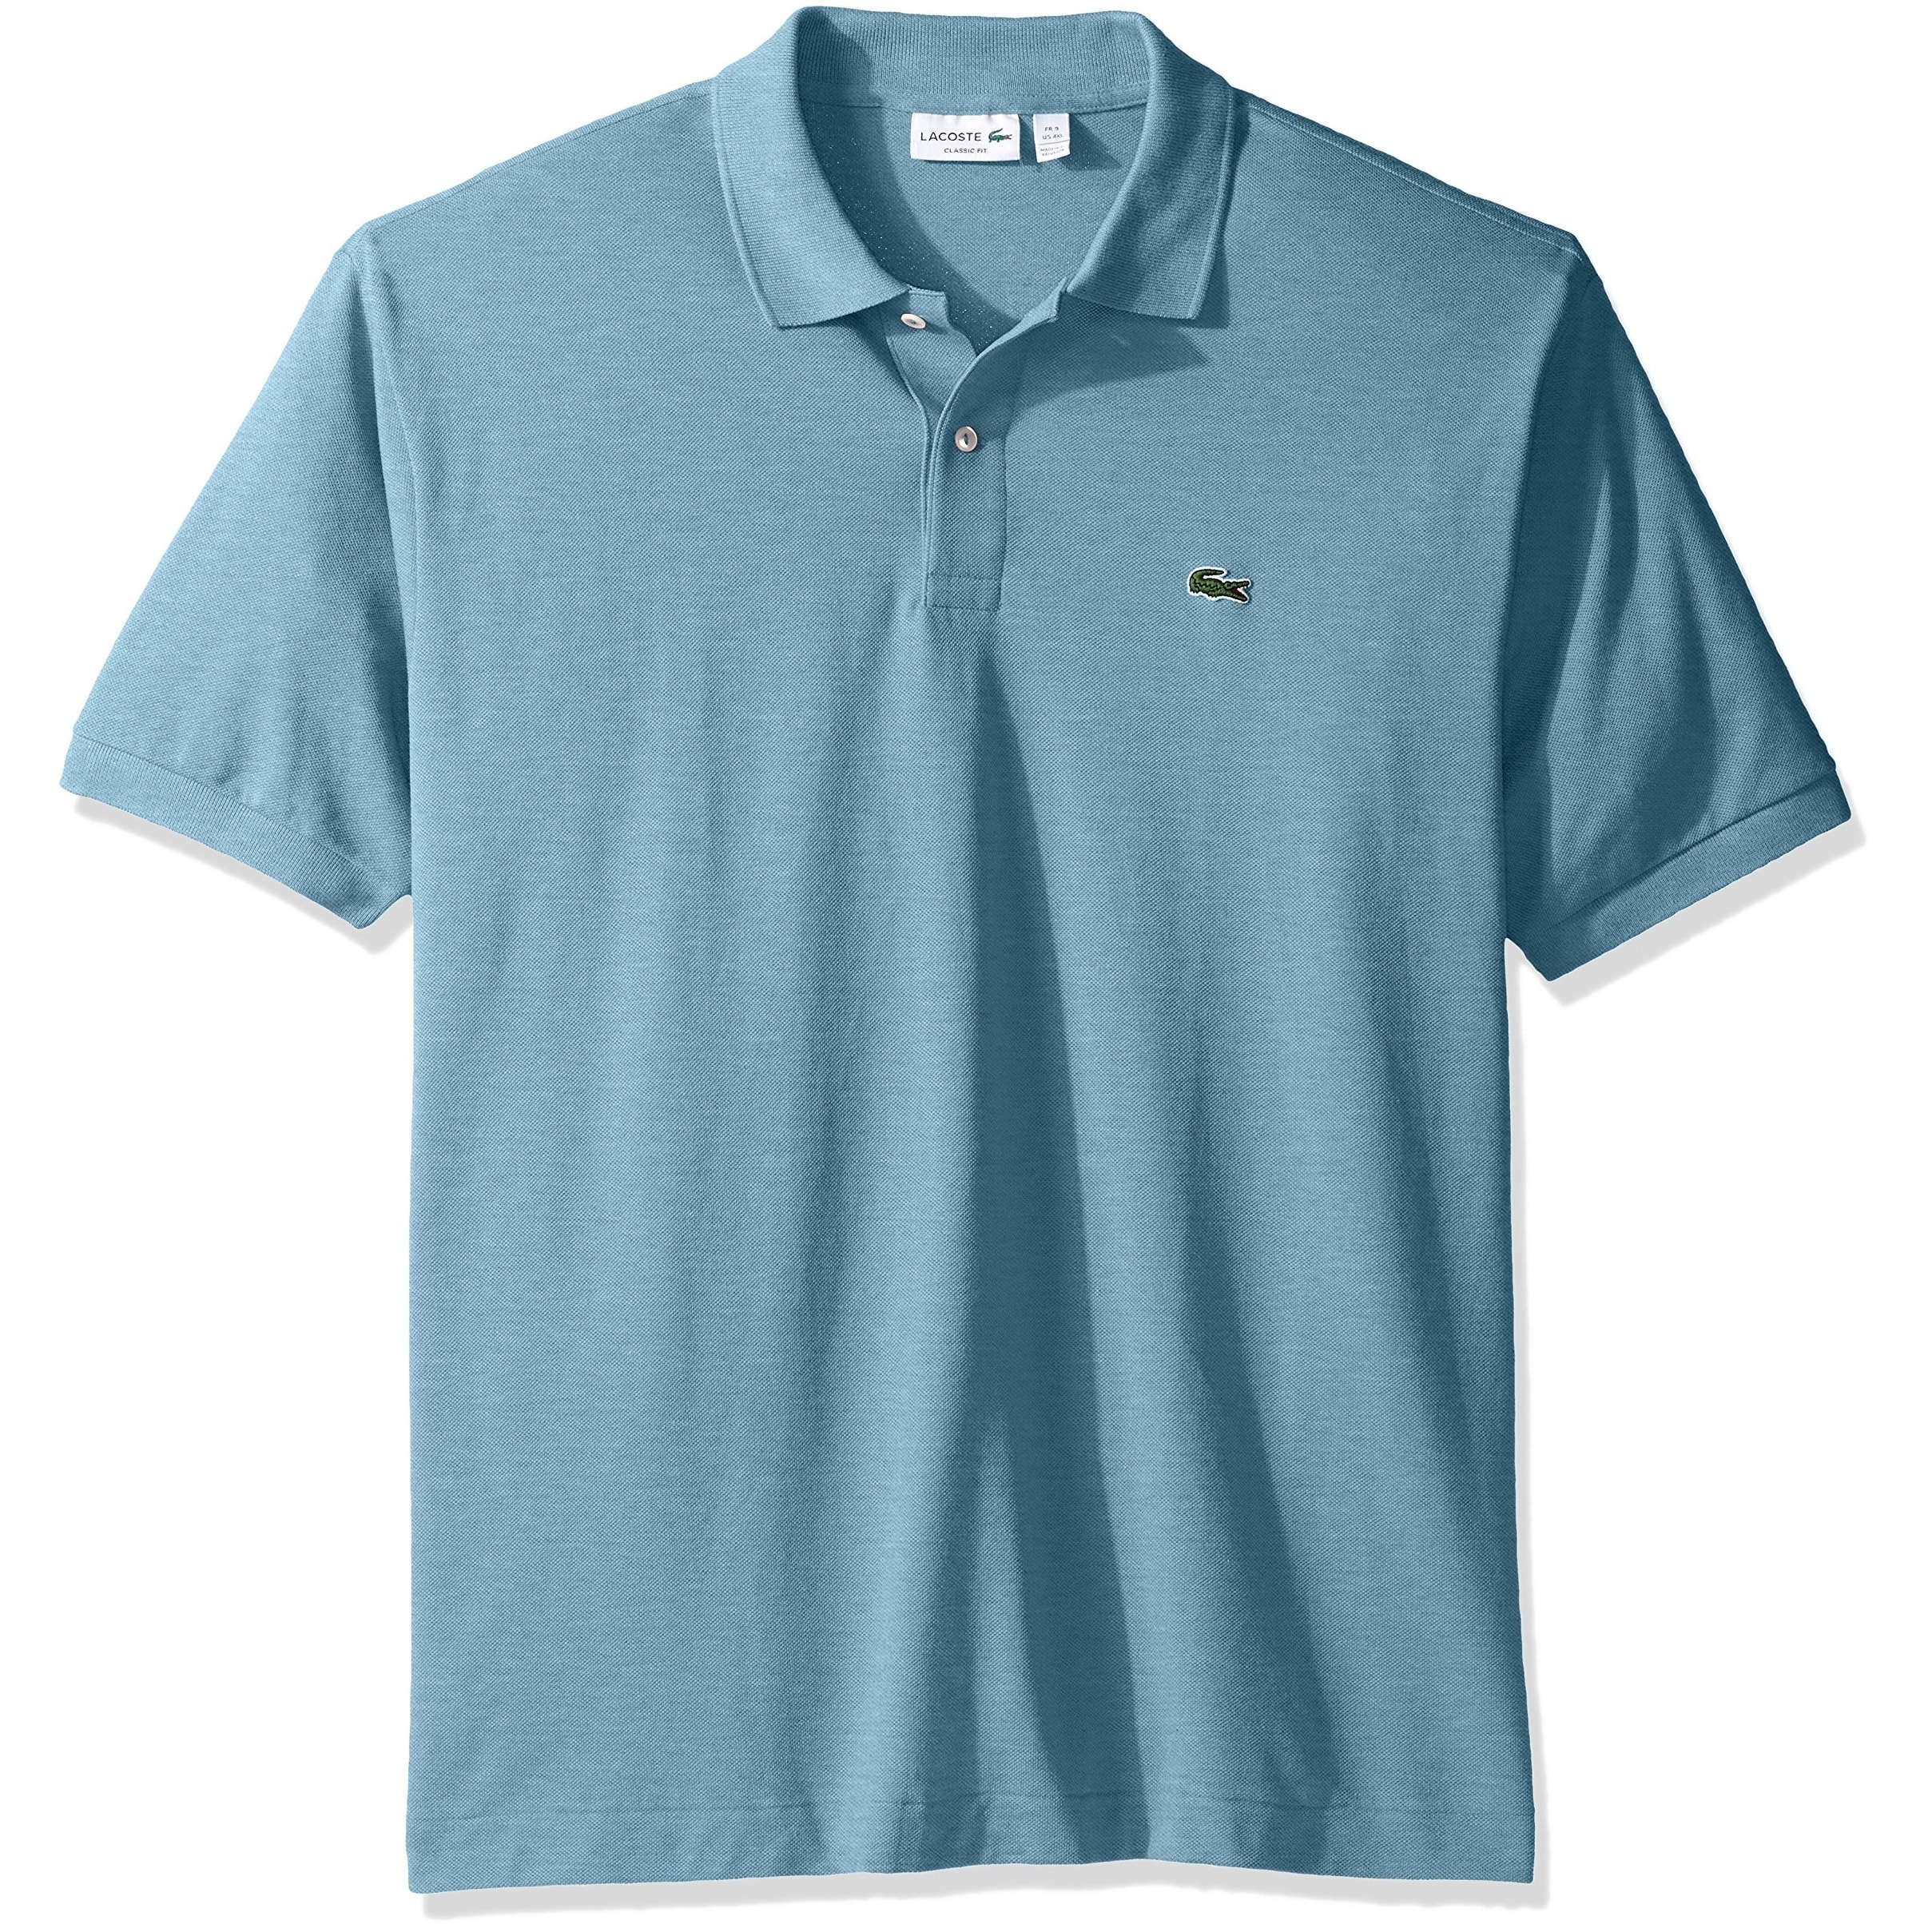 Lacoste Slim Fit Polo Size Chart